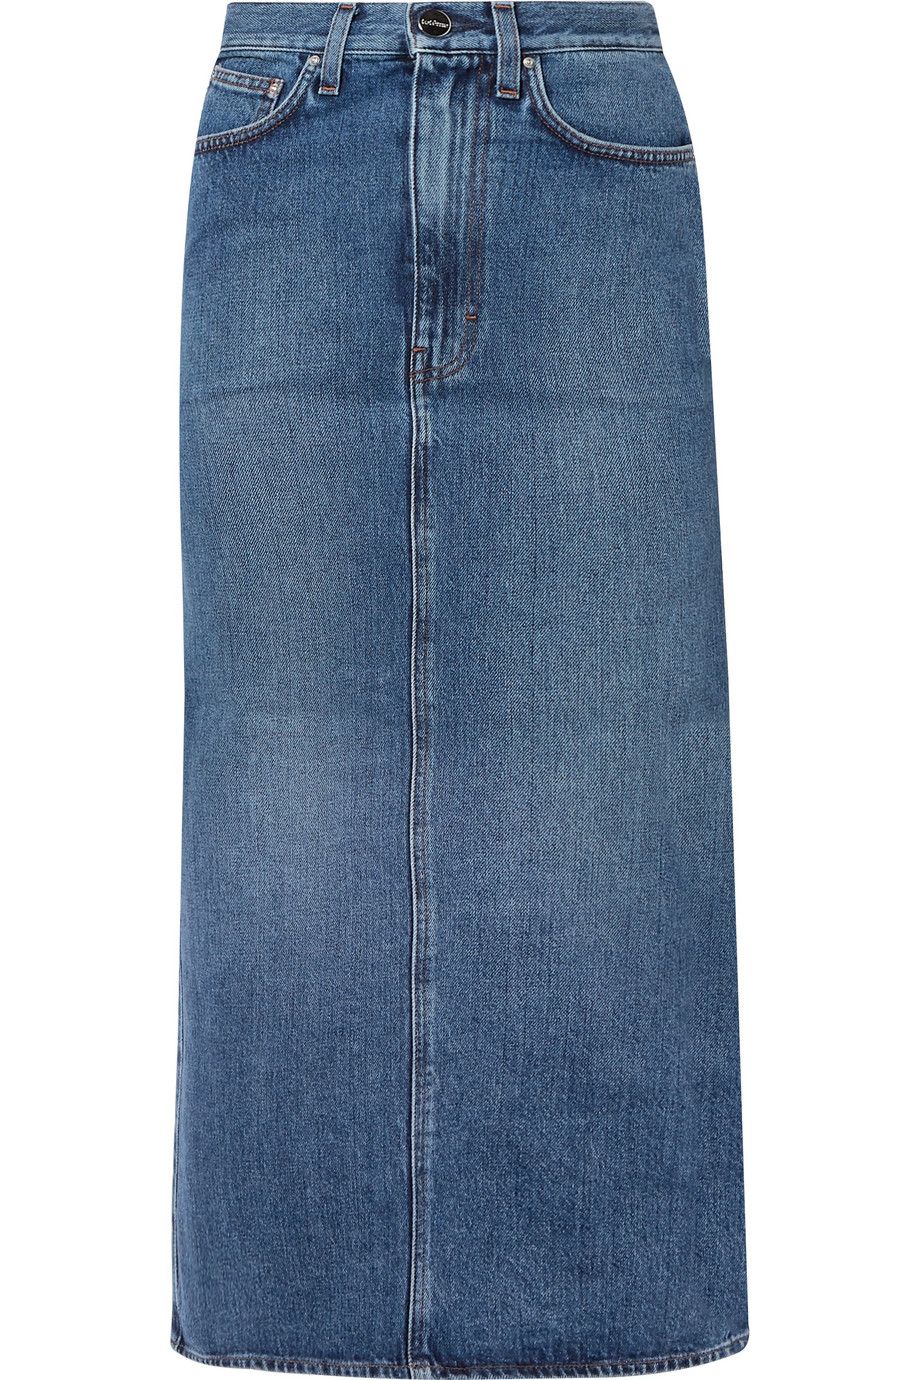 skirts jeans